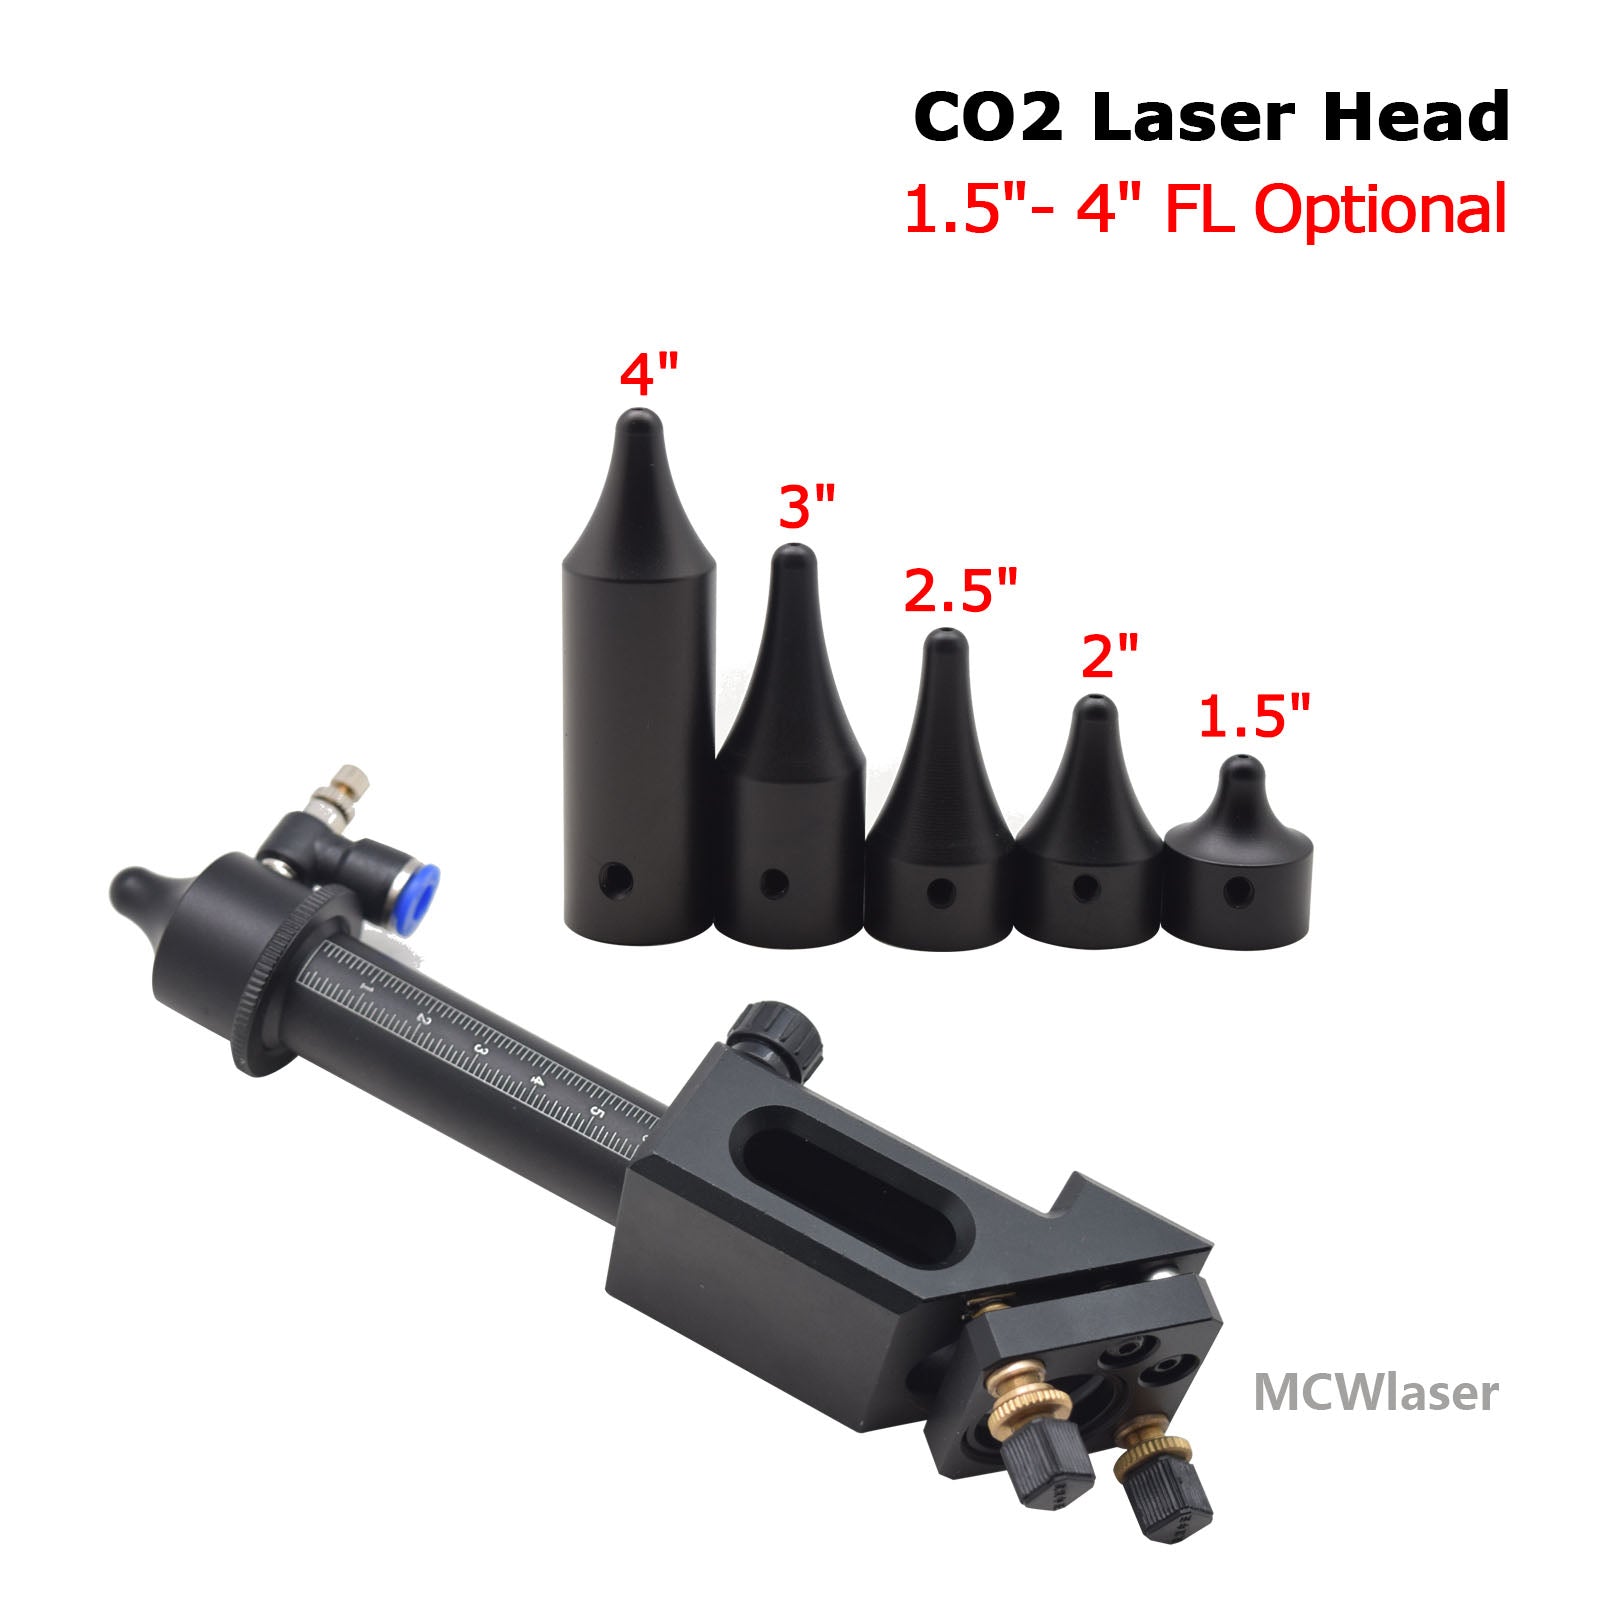 MCWlaser Laser Head For CO2 Laser Engraving Cutting Machine